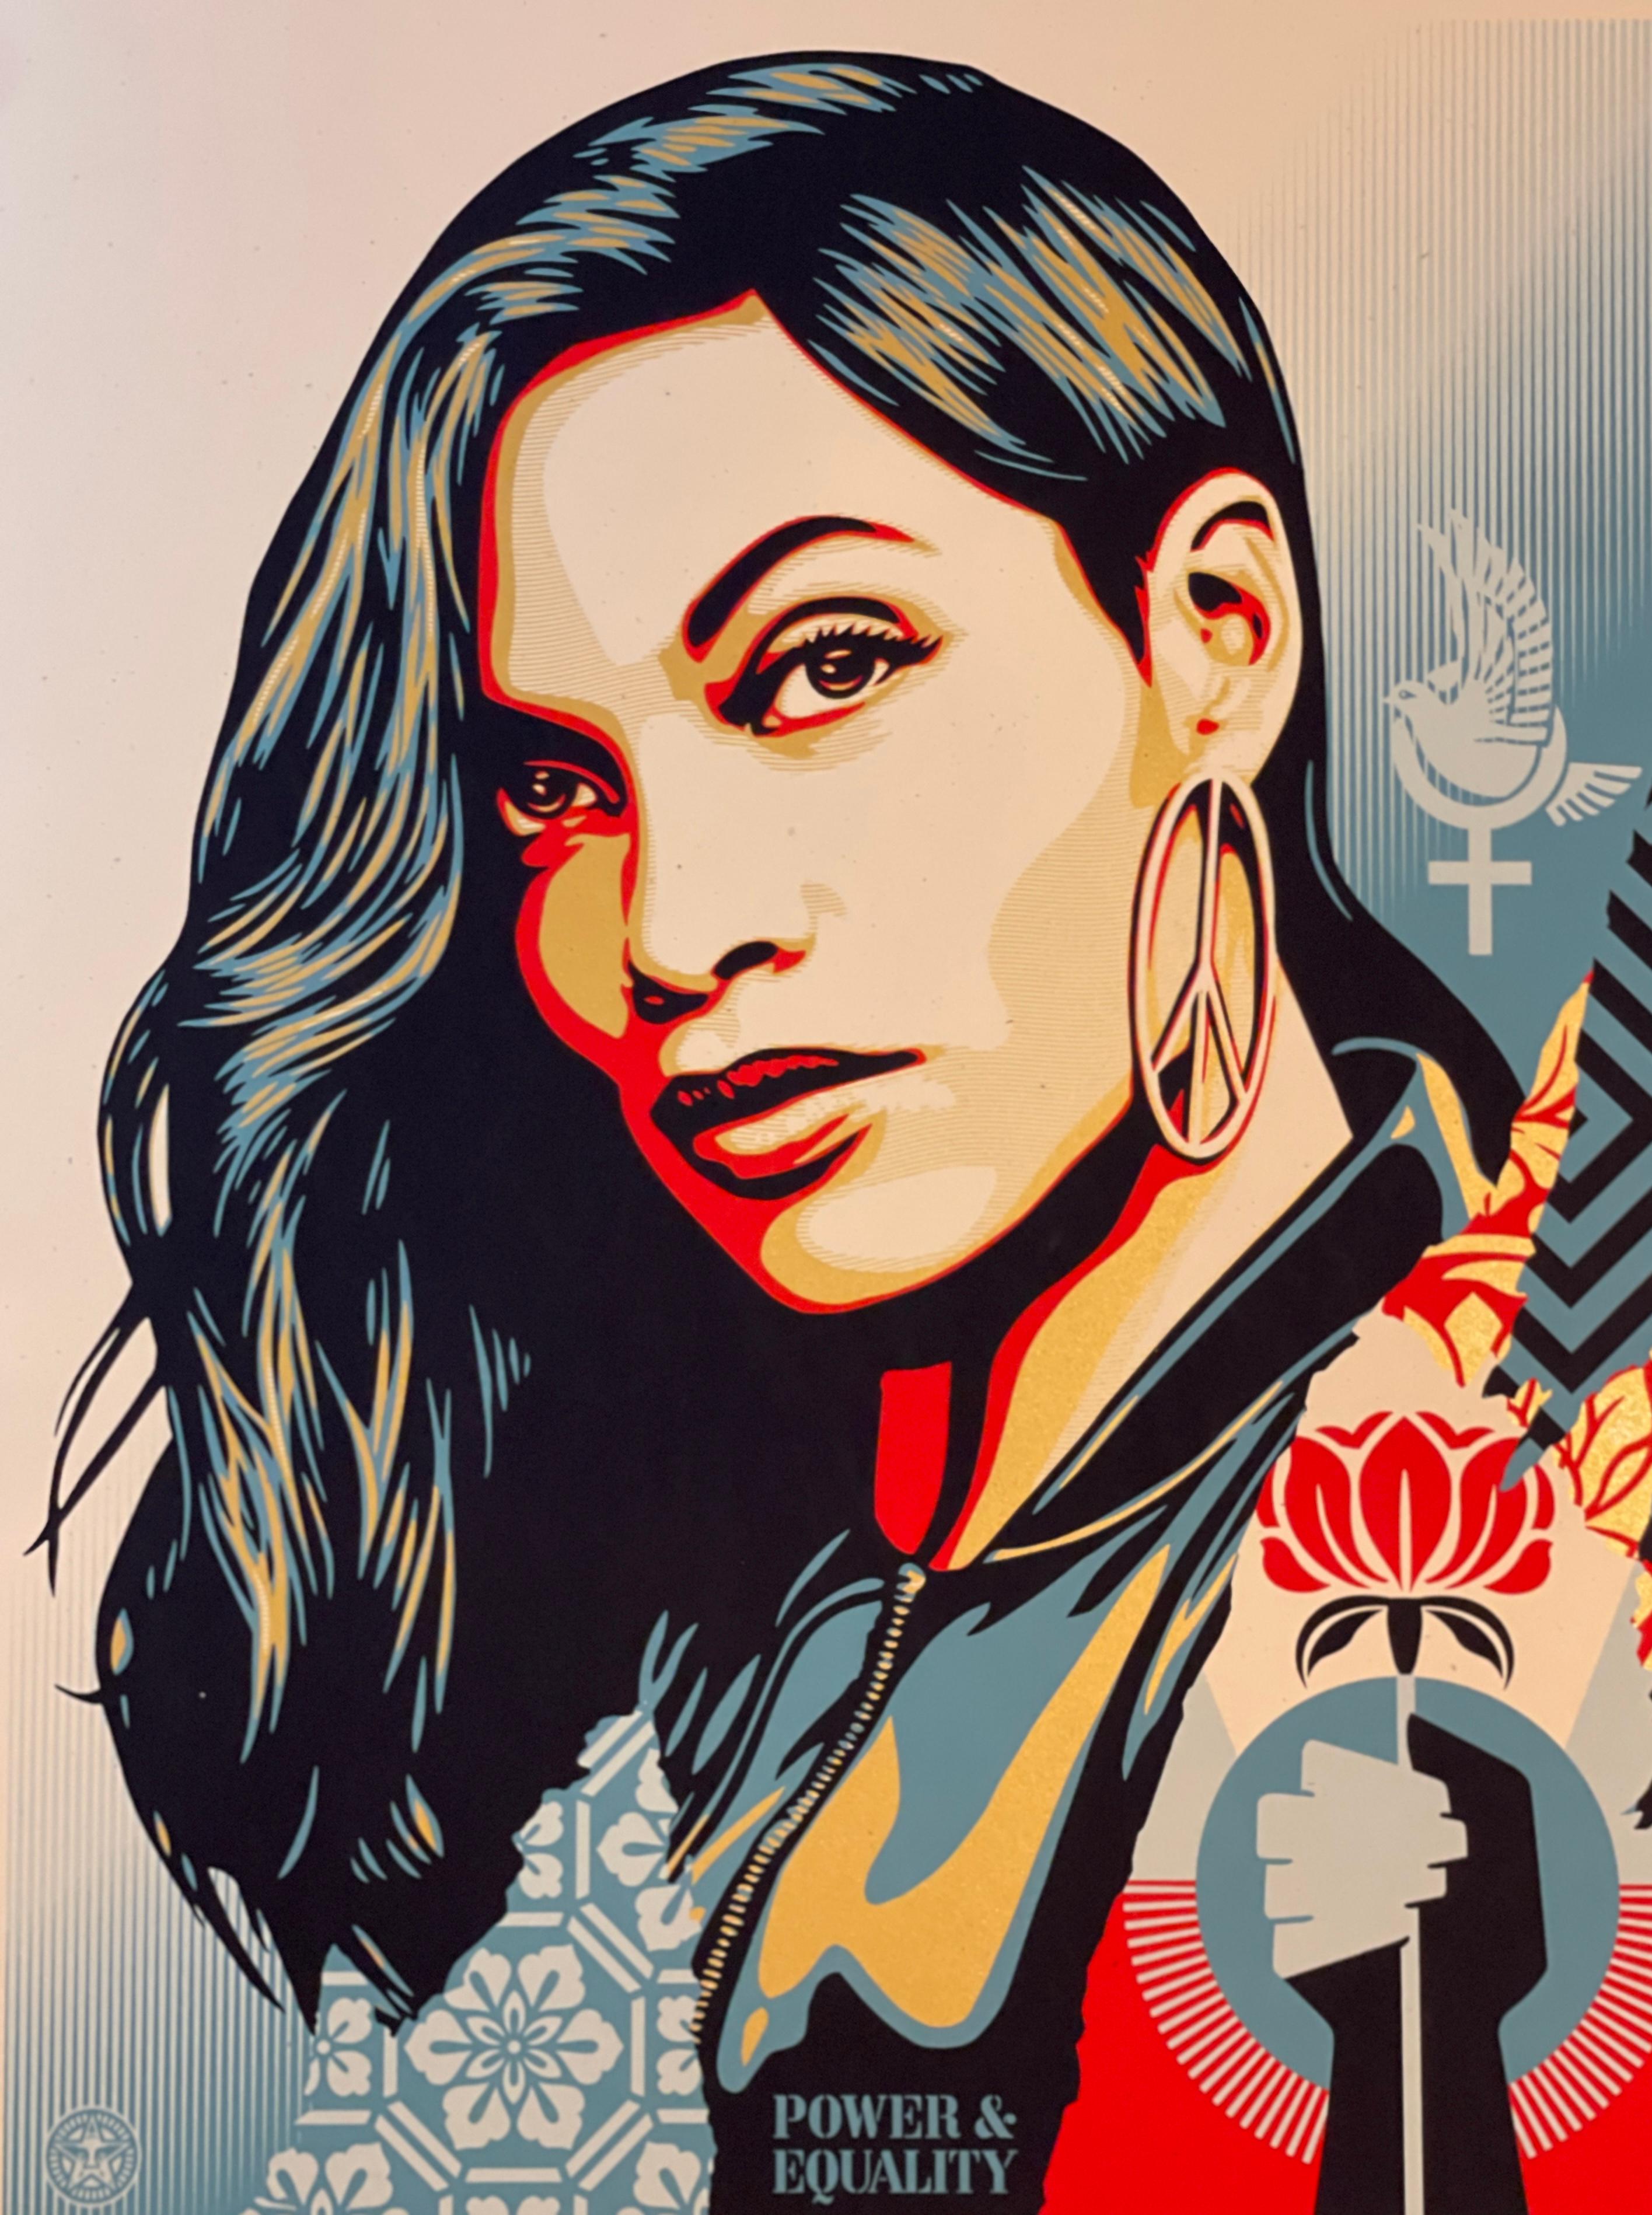 Shepard Fairey Print Signed “Power & Equality” Flower - Rosario Dawson For Sale 2